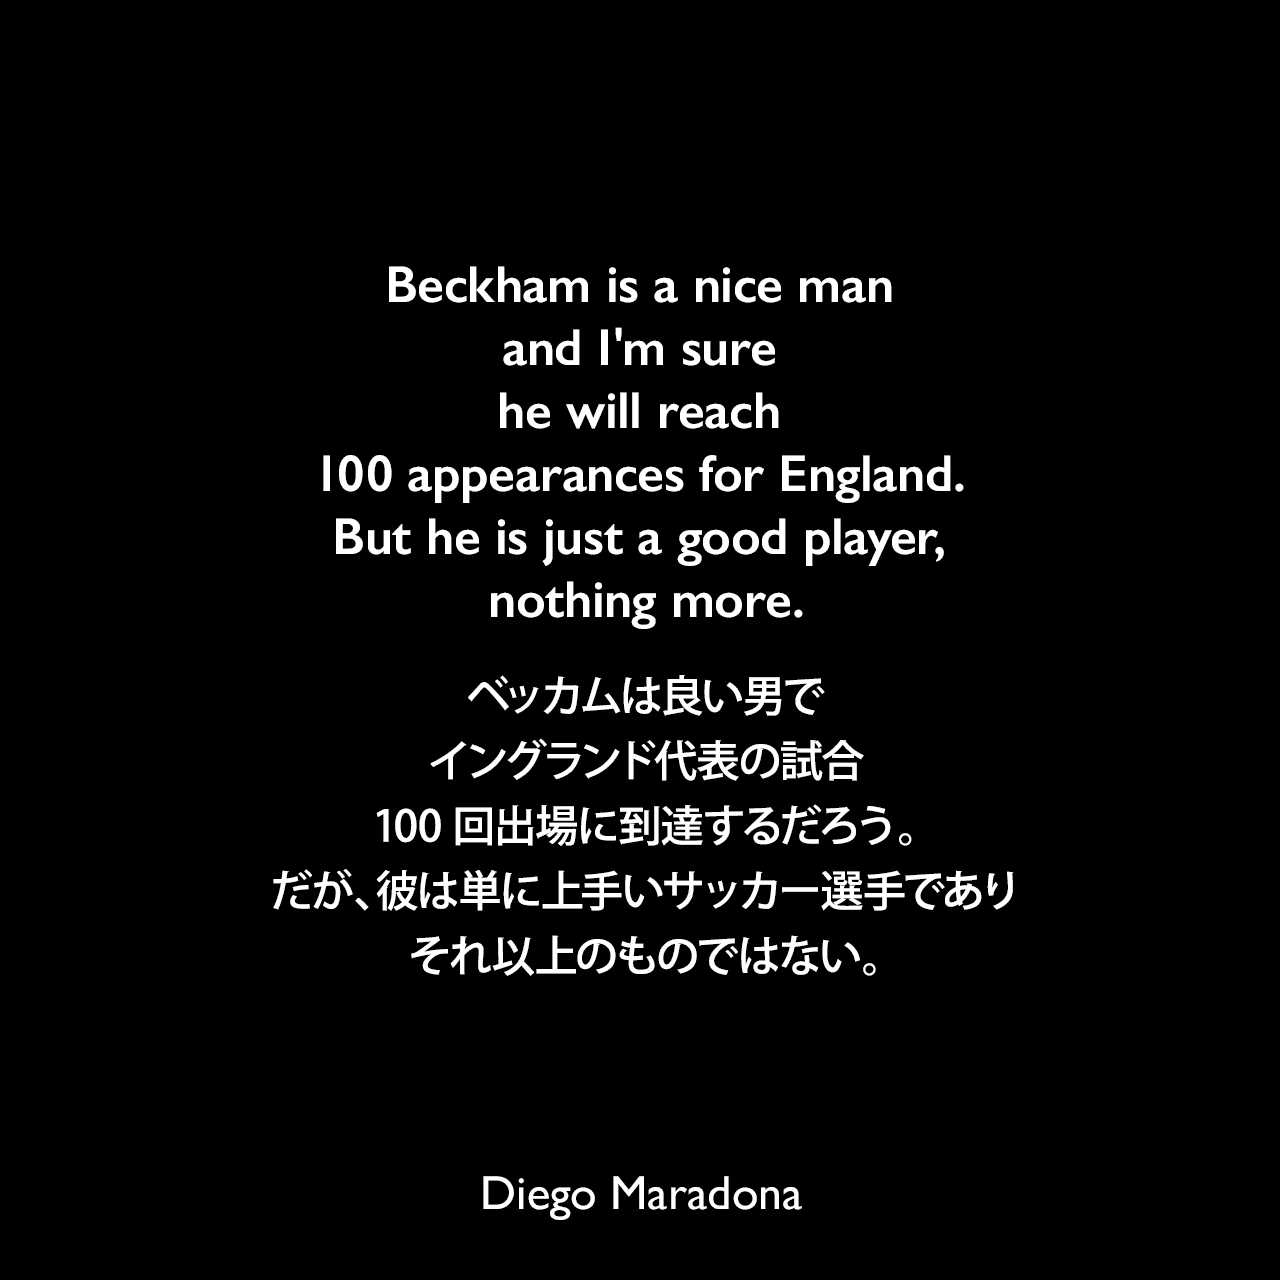 Beckham is a nice man and I'm sure he will reach 100 appearances for England. But he is just a good player, nothing more.ベッカムは良い男で、イングランド代表の試合100回出場に到達するだろう。だが、彼は単に上手いサッカー選手であり、それ以上のものではない。Diego Maradona